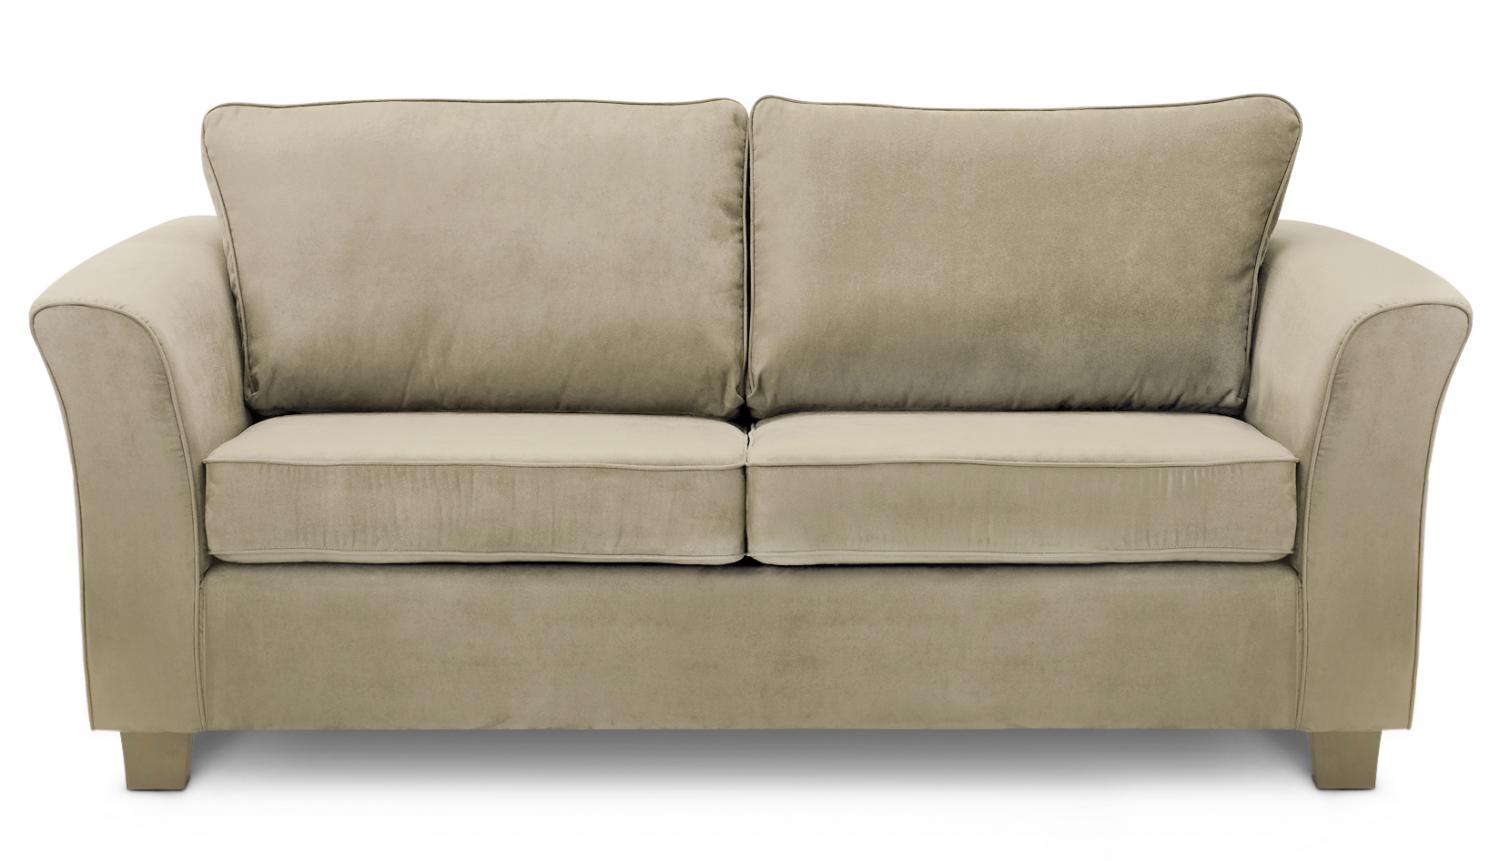 image-467716-classic-calm-sofa-couch.jpg